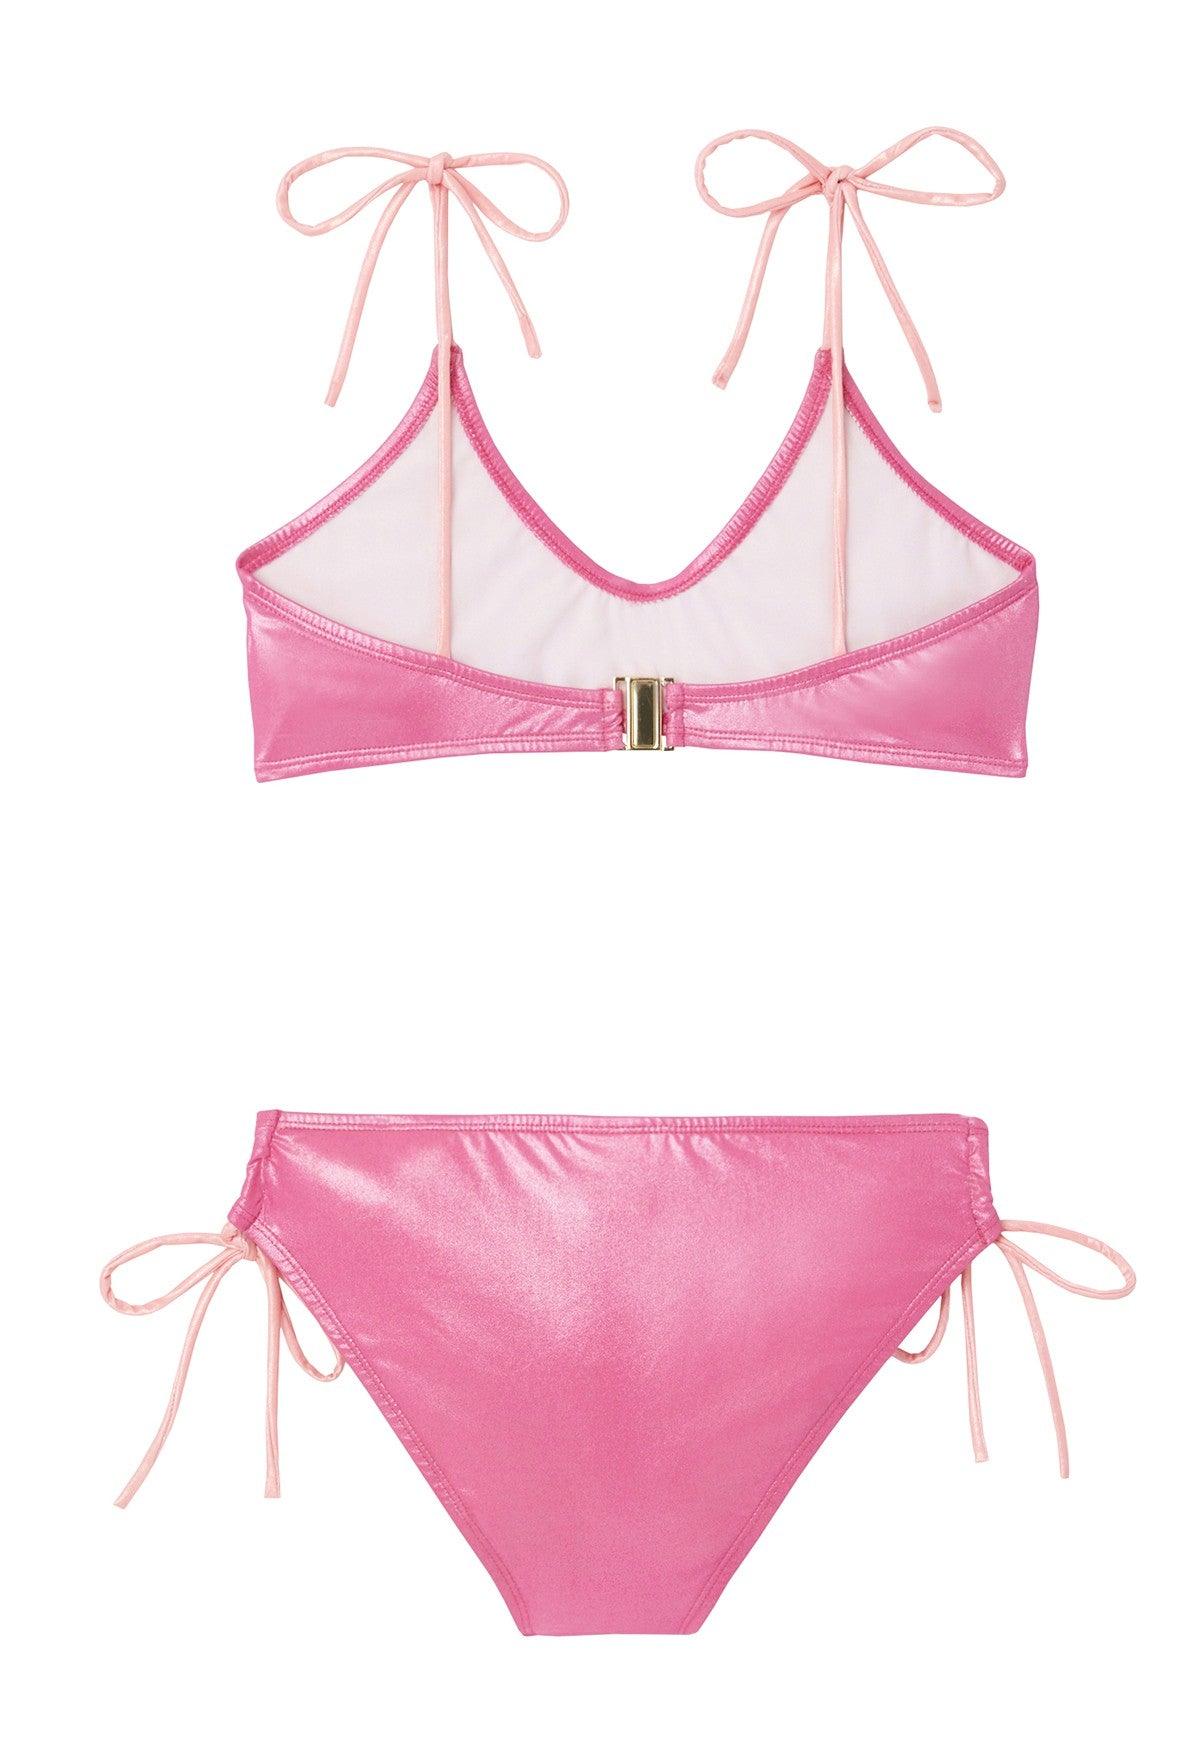 Girl two-piece, pink iridescent